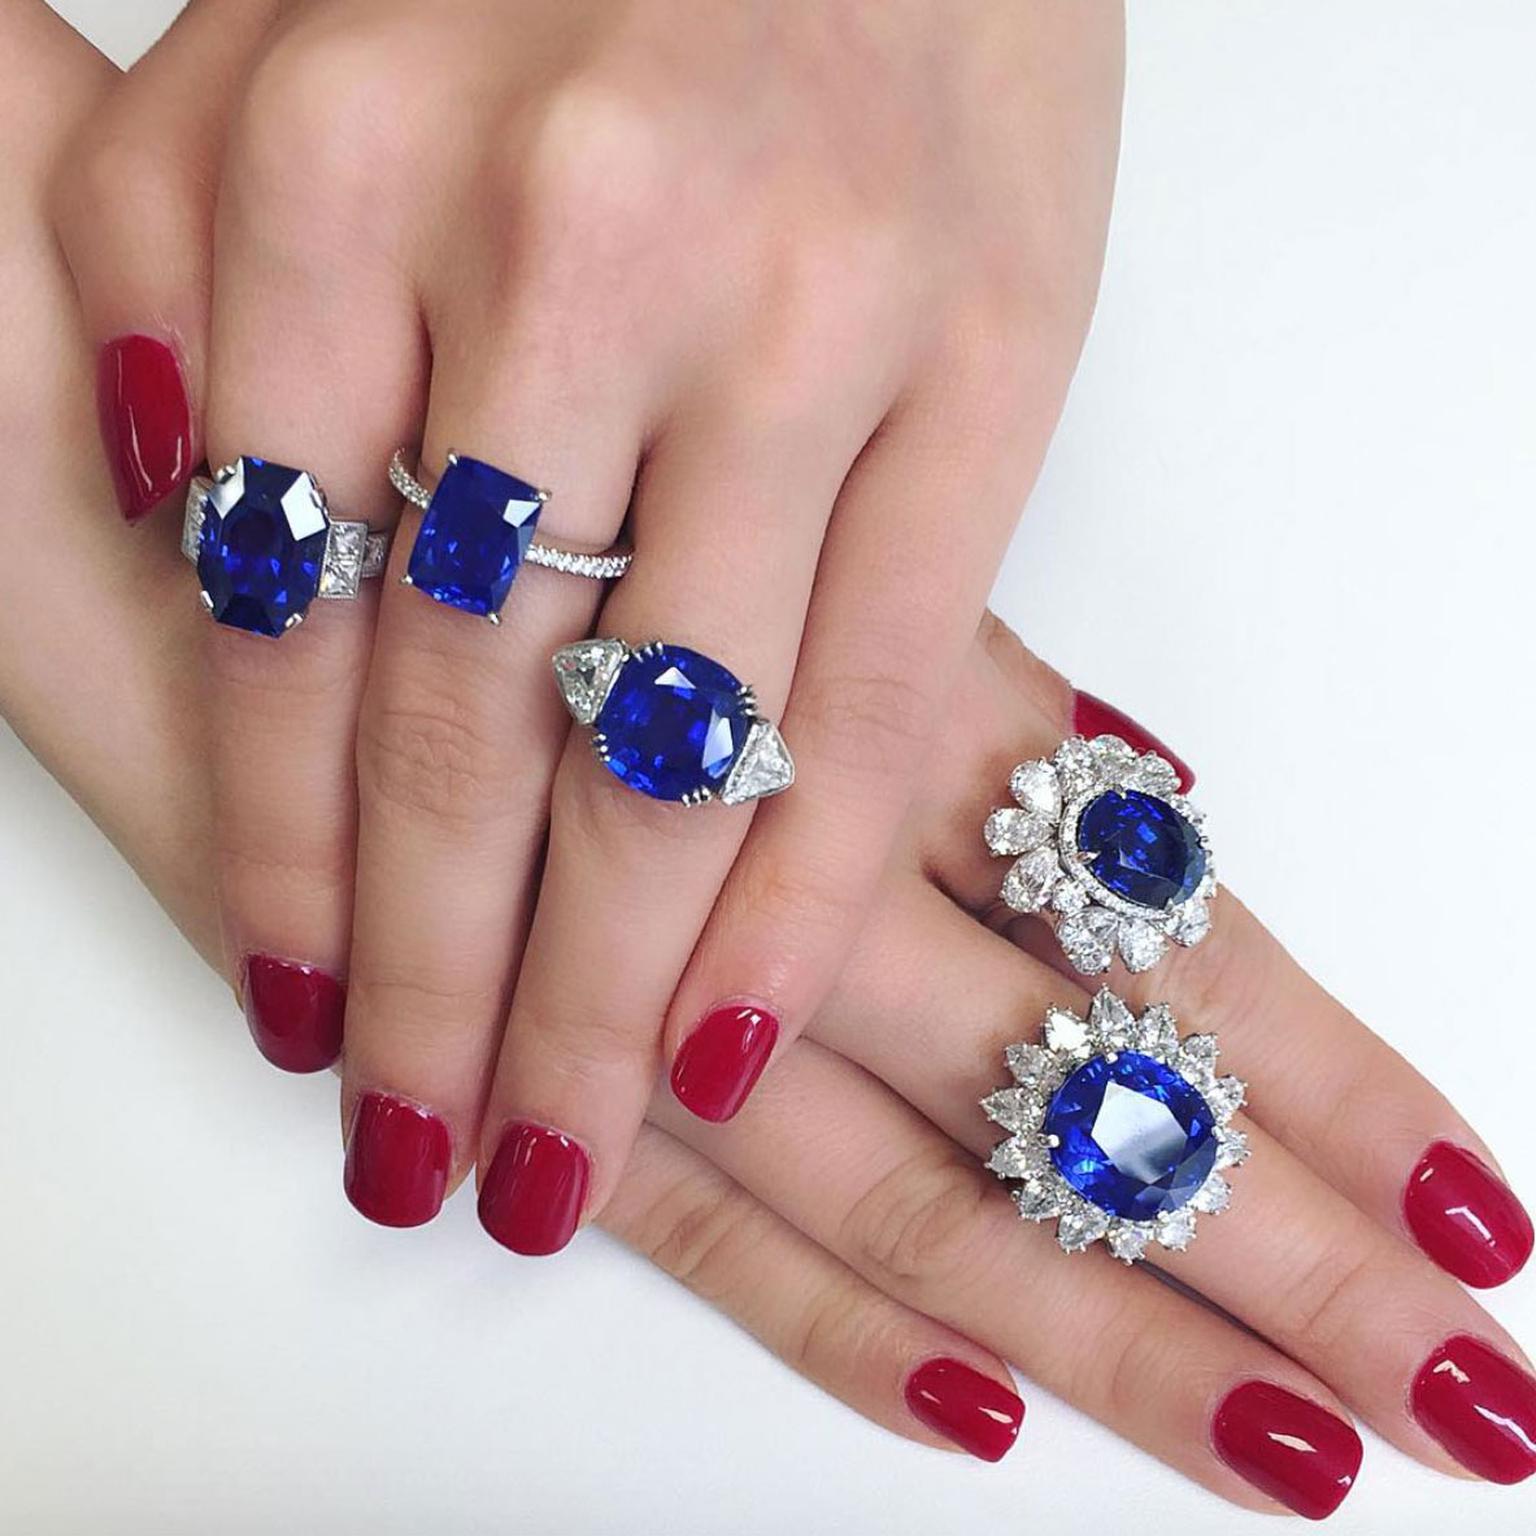 Connie Luk, who works at Christie's jewellery department, on Instagram